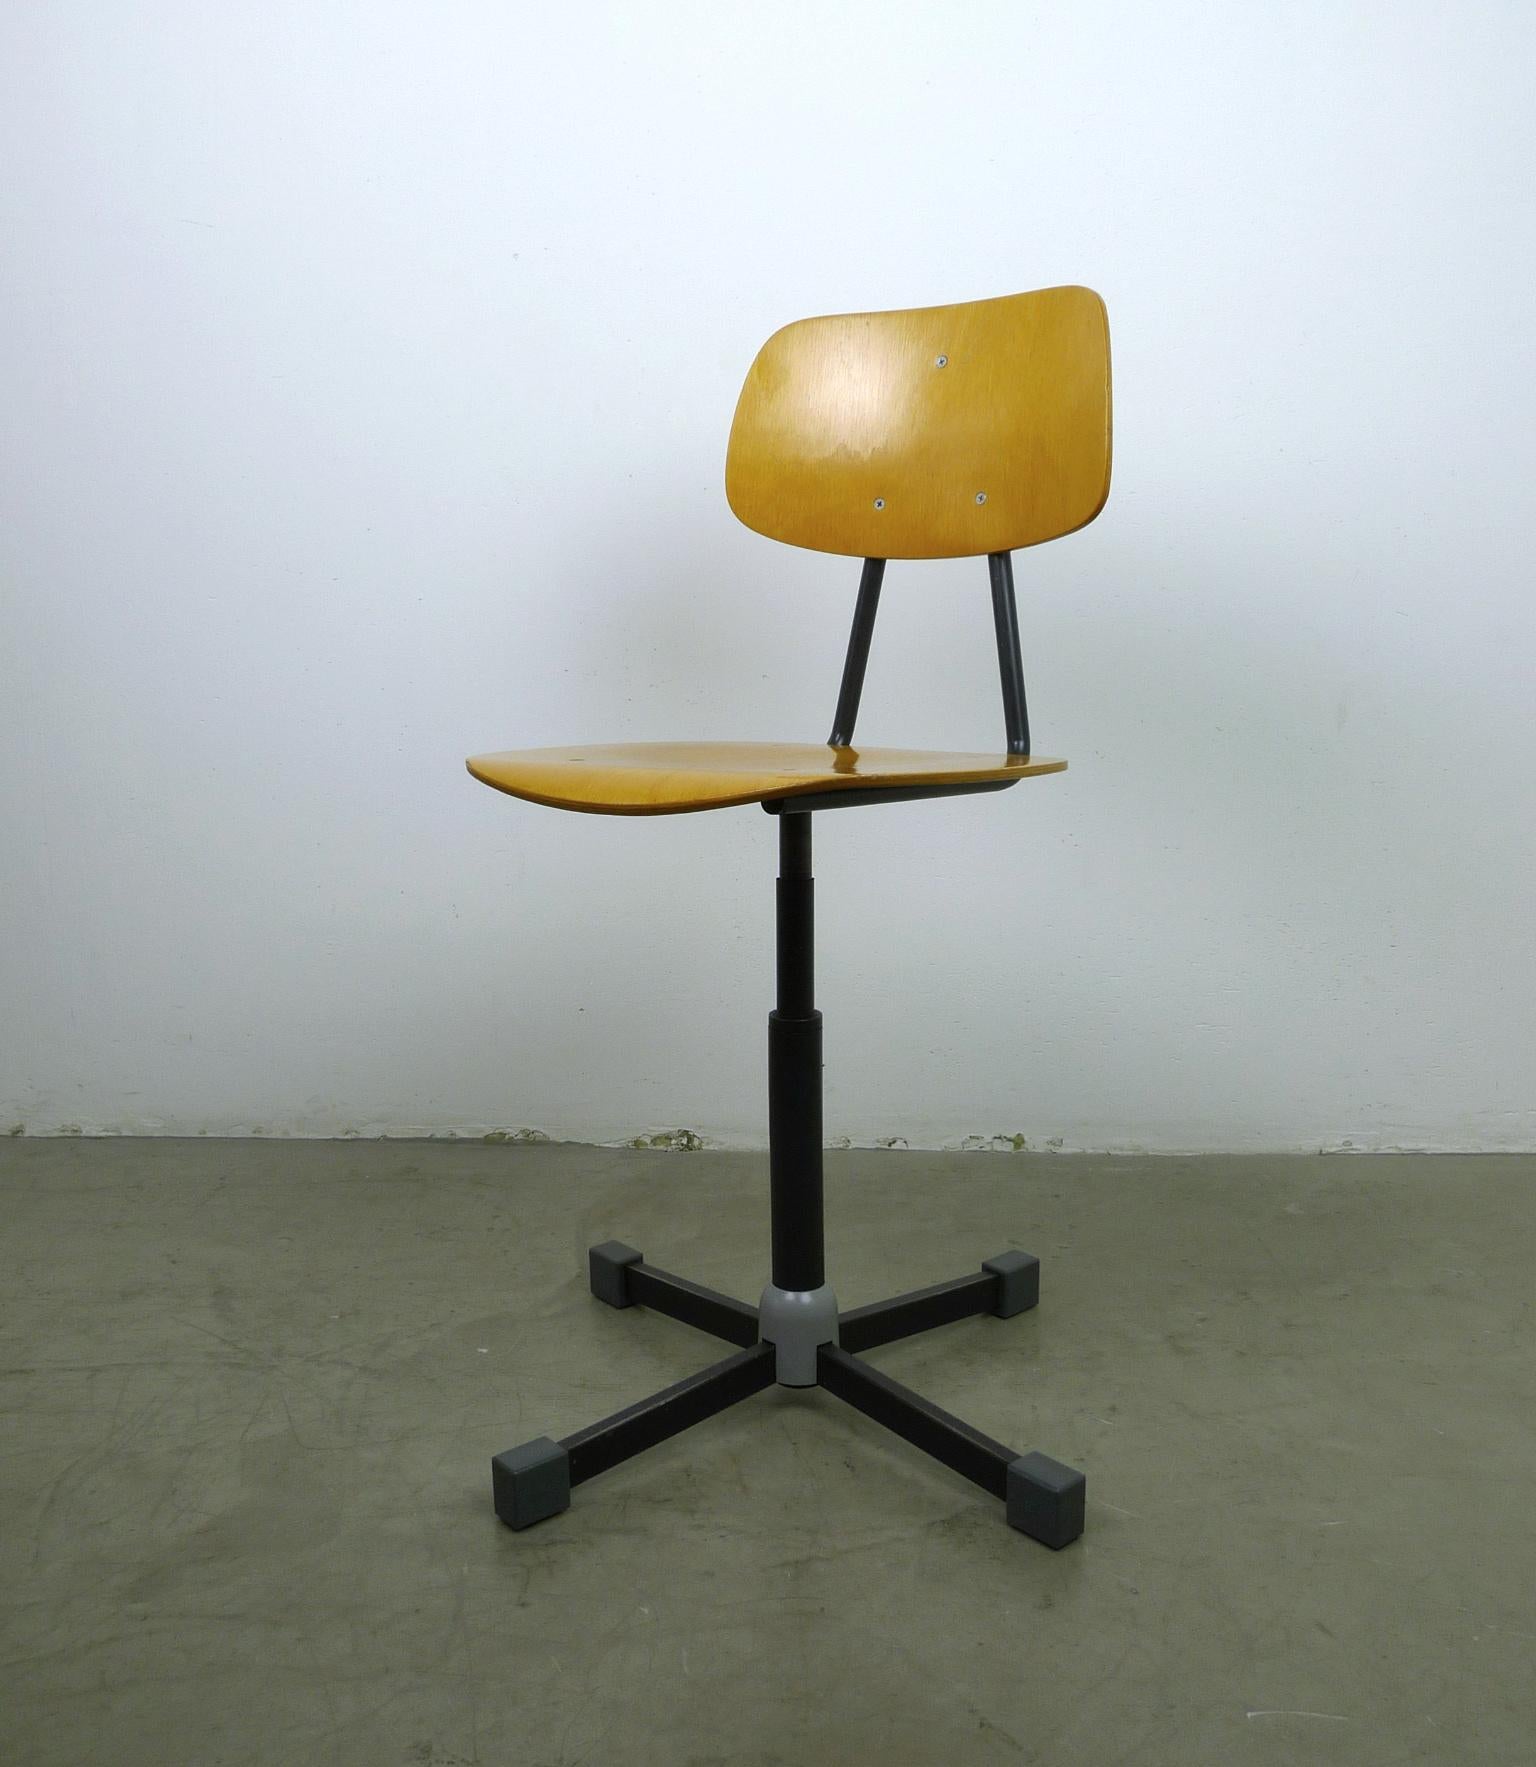 This German architect's chair was produced in the 1970s. The work chair is turnable and height adjustable. The seat height can be varied by turning the seat between 44 cm and 59 cm. The chair is in very good condition.